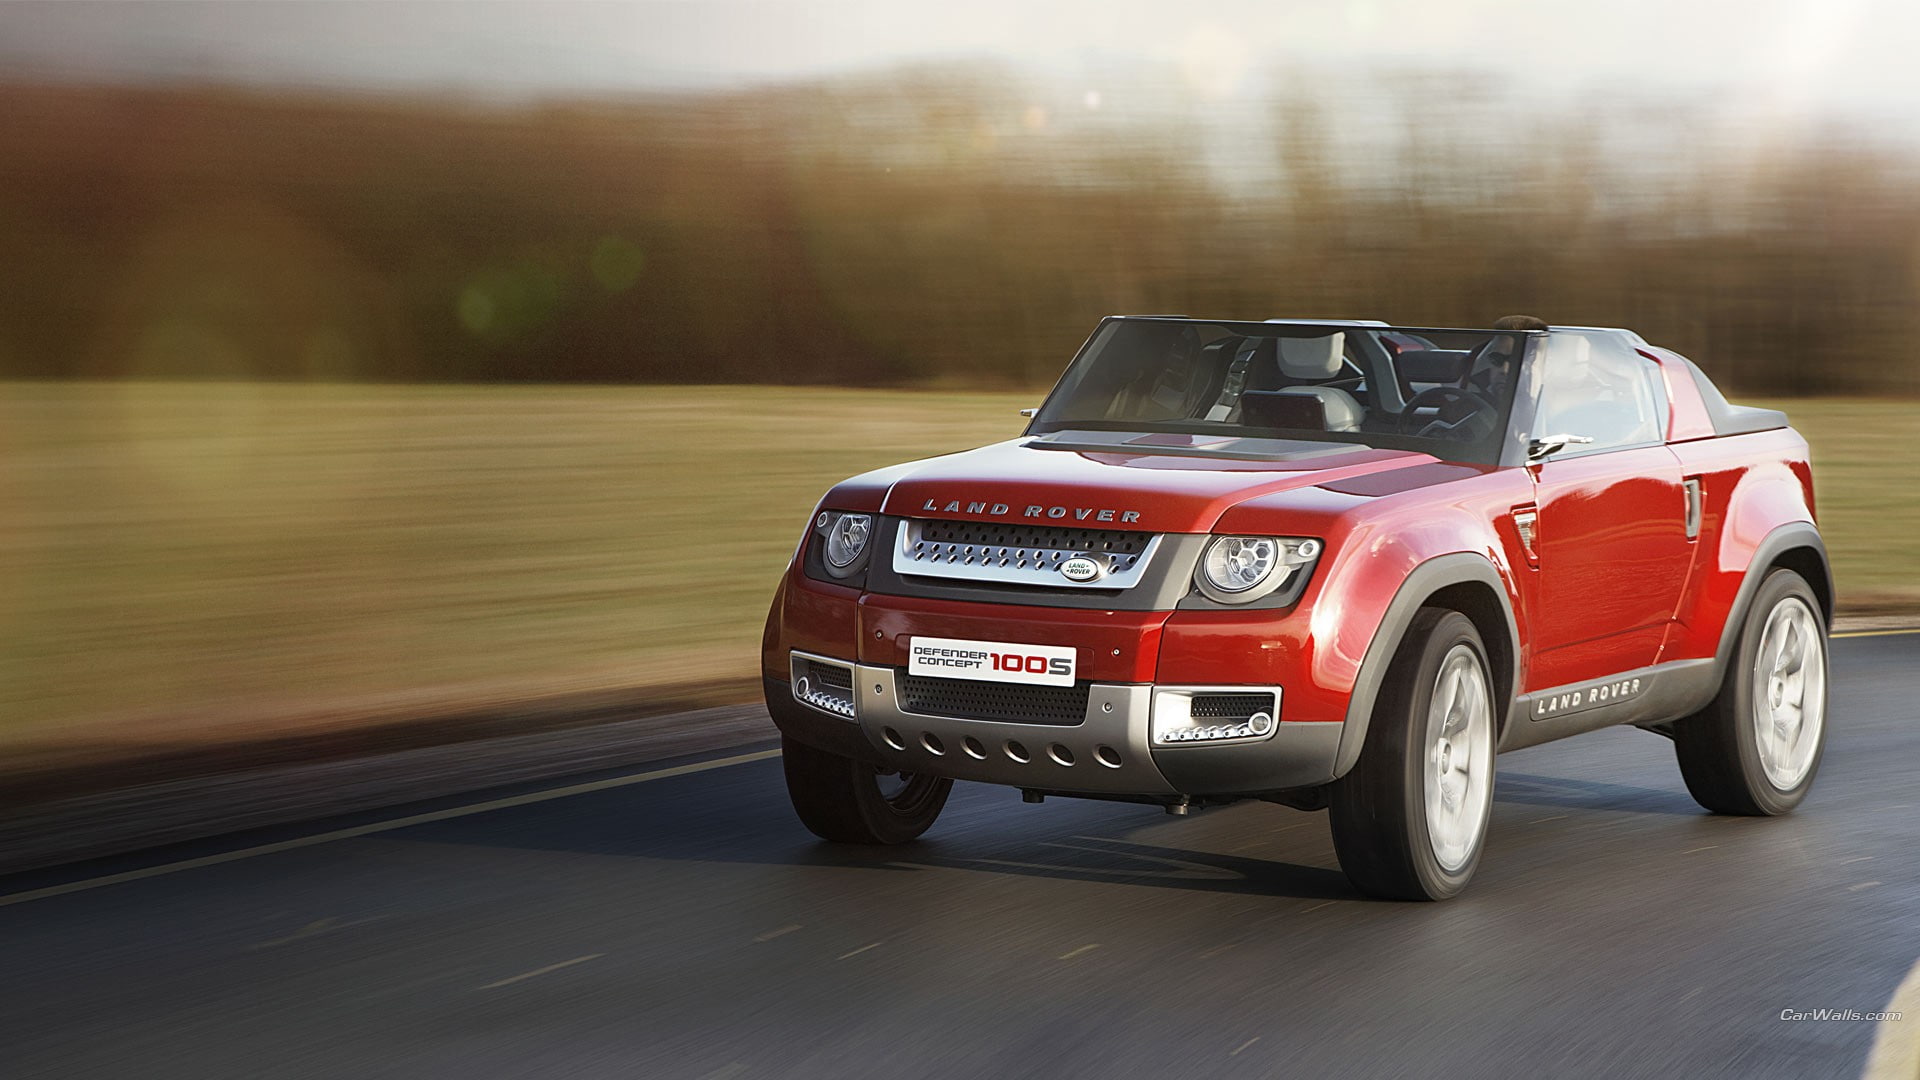 Concept Cars, Land Rover DC100, Red Cars